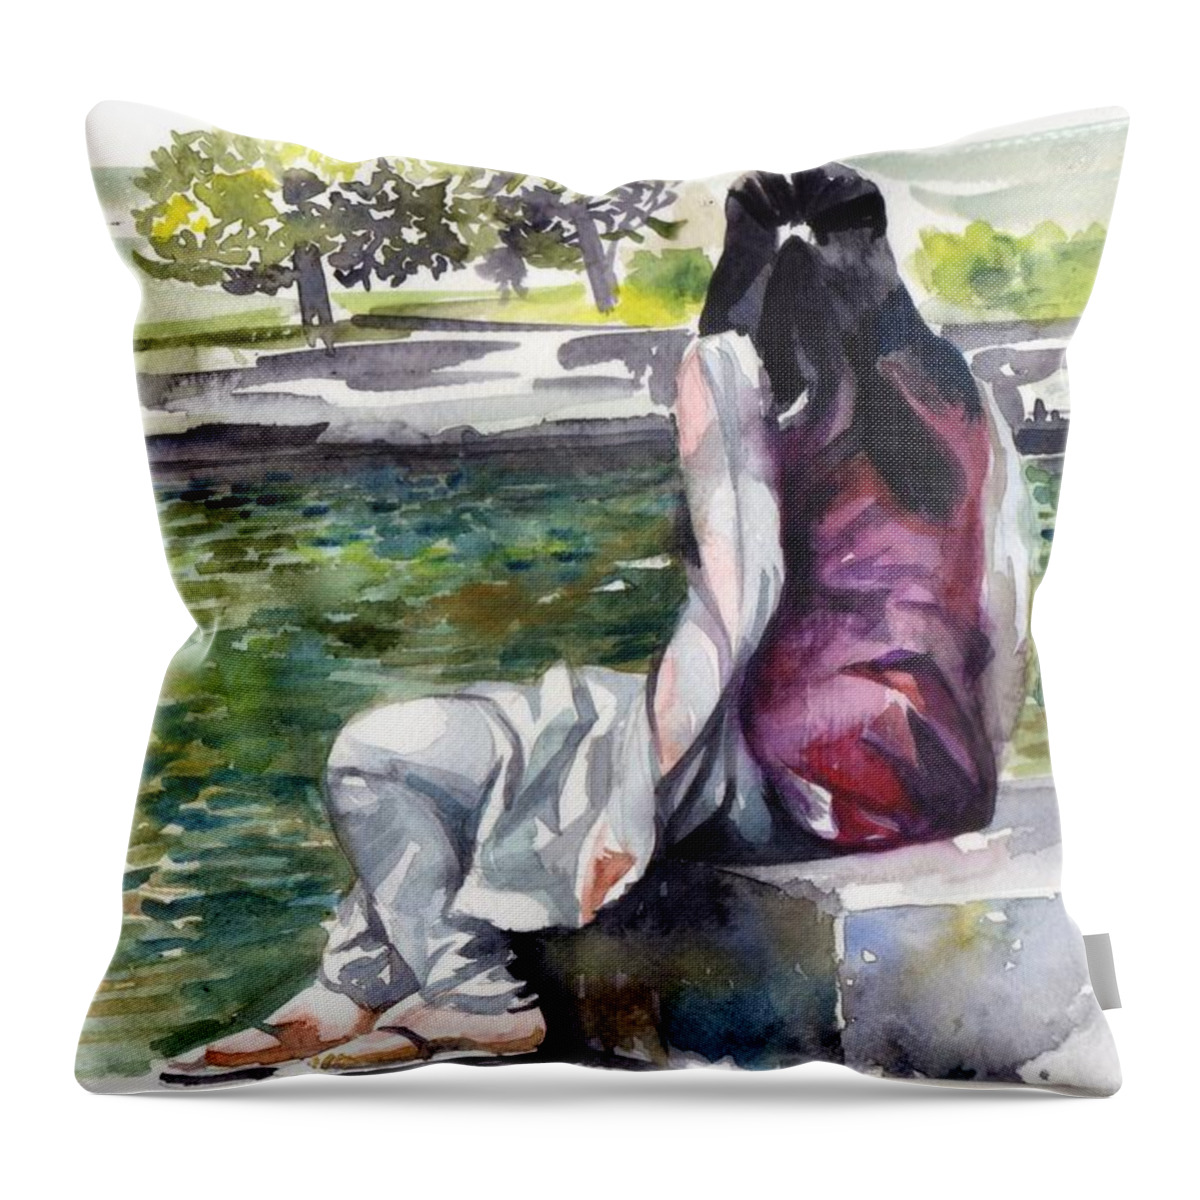 Waiting Throw Pillow featuring the drawing Waiting by the pool by Parag Pendharkar